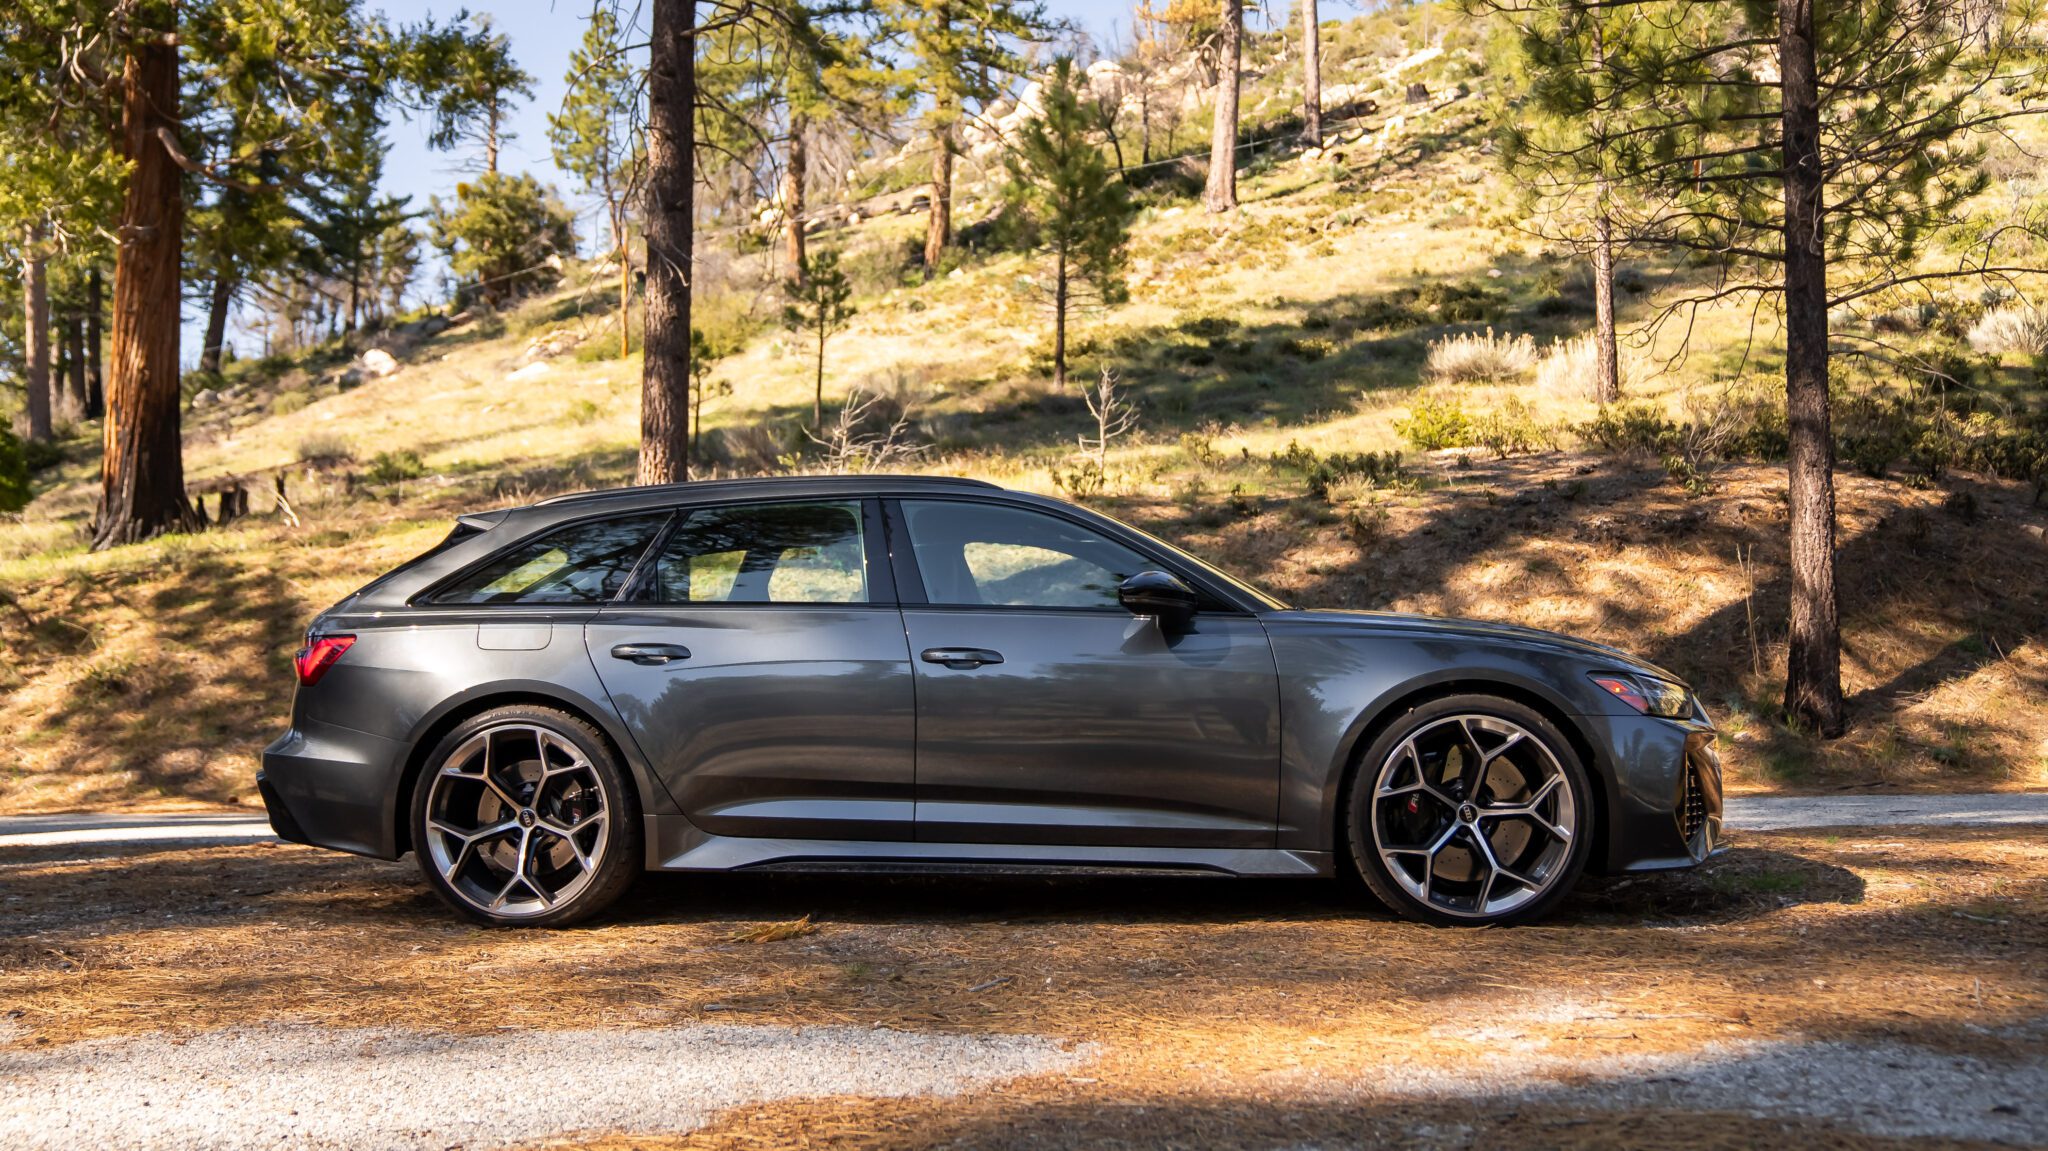 An image of an Audi RS6 Avant Performance parked outdoors.